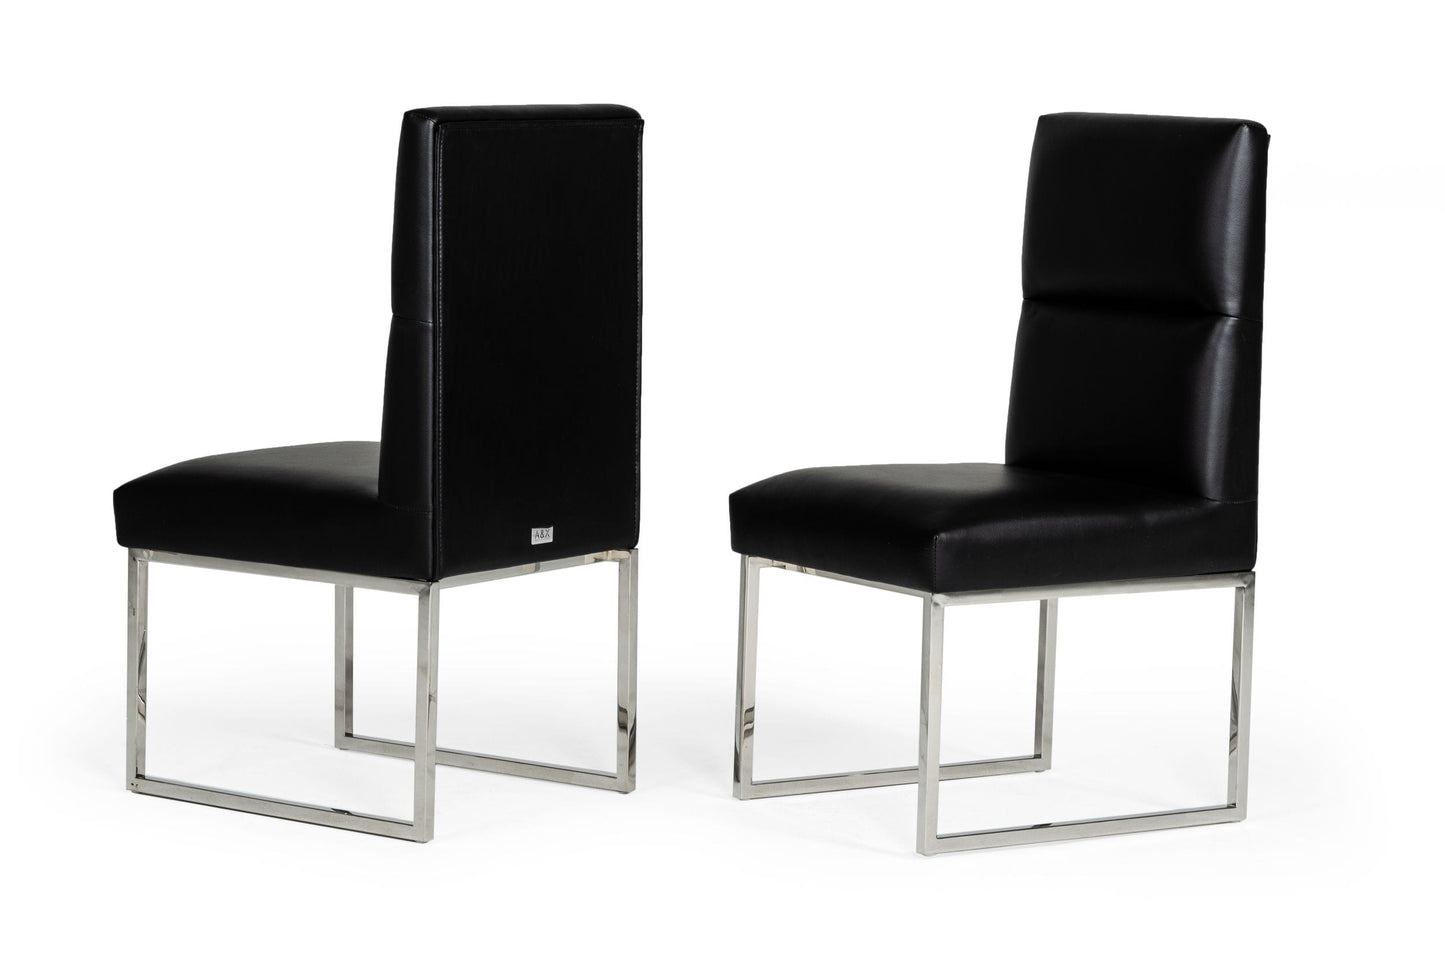 VIG Furniture AX Carla Black Leatherette Dining Chair Set of 2